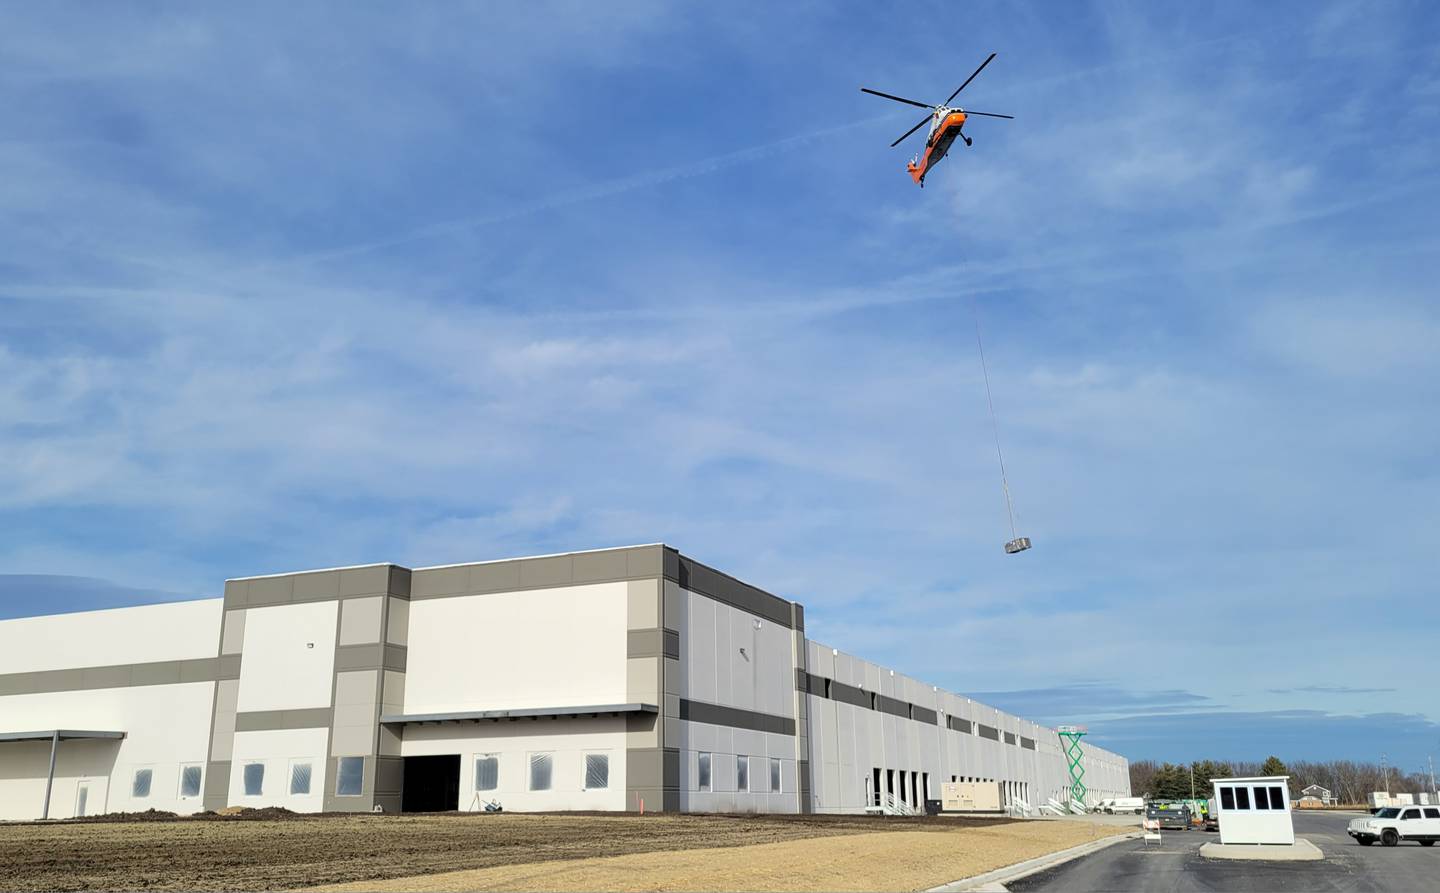 A 1962 Sikorsky helicopter lifts one of 10 heating and air conditioning units onto the roof of the new Ollie’s Bargain Outlet warehouse near the intersection of Interstate 80 and Illinois Route 26 in Princeton on Friday morning. The helicopter, according to an employee of Midwest Helicopters in Willowbrook, has a maximum lifting capacity of 5,000 pounds, so it managed to handle with ease the units that ranged in weight from 1,000 to 2,500 pounds in less than half an hour.